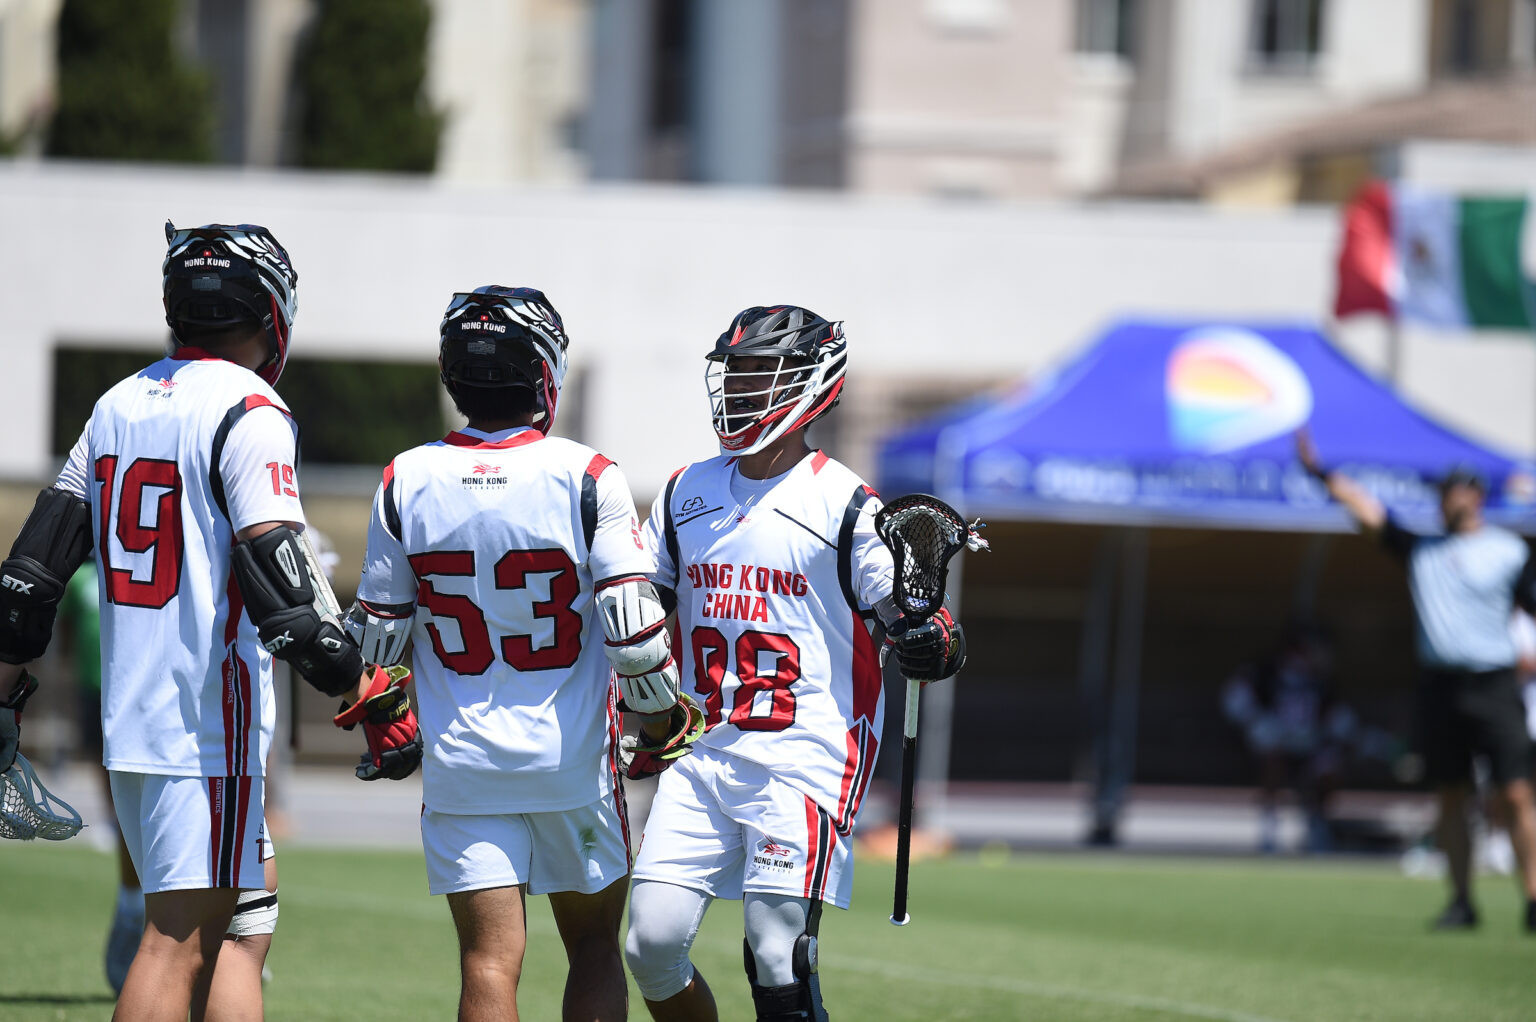 Hong Kong reach Men's World Lacrosse playoffs after six goal swing to beat against Mexico